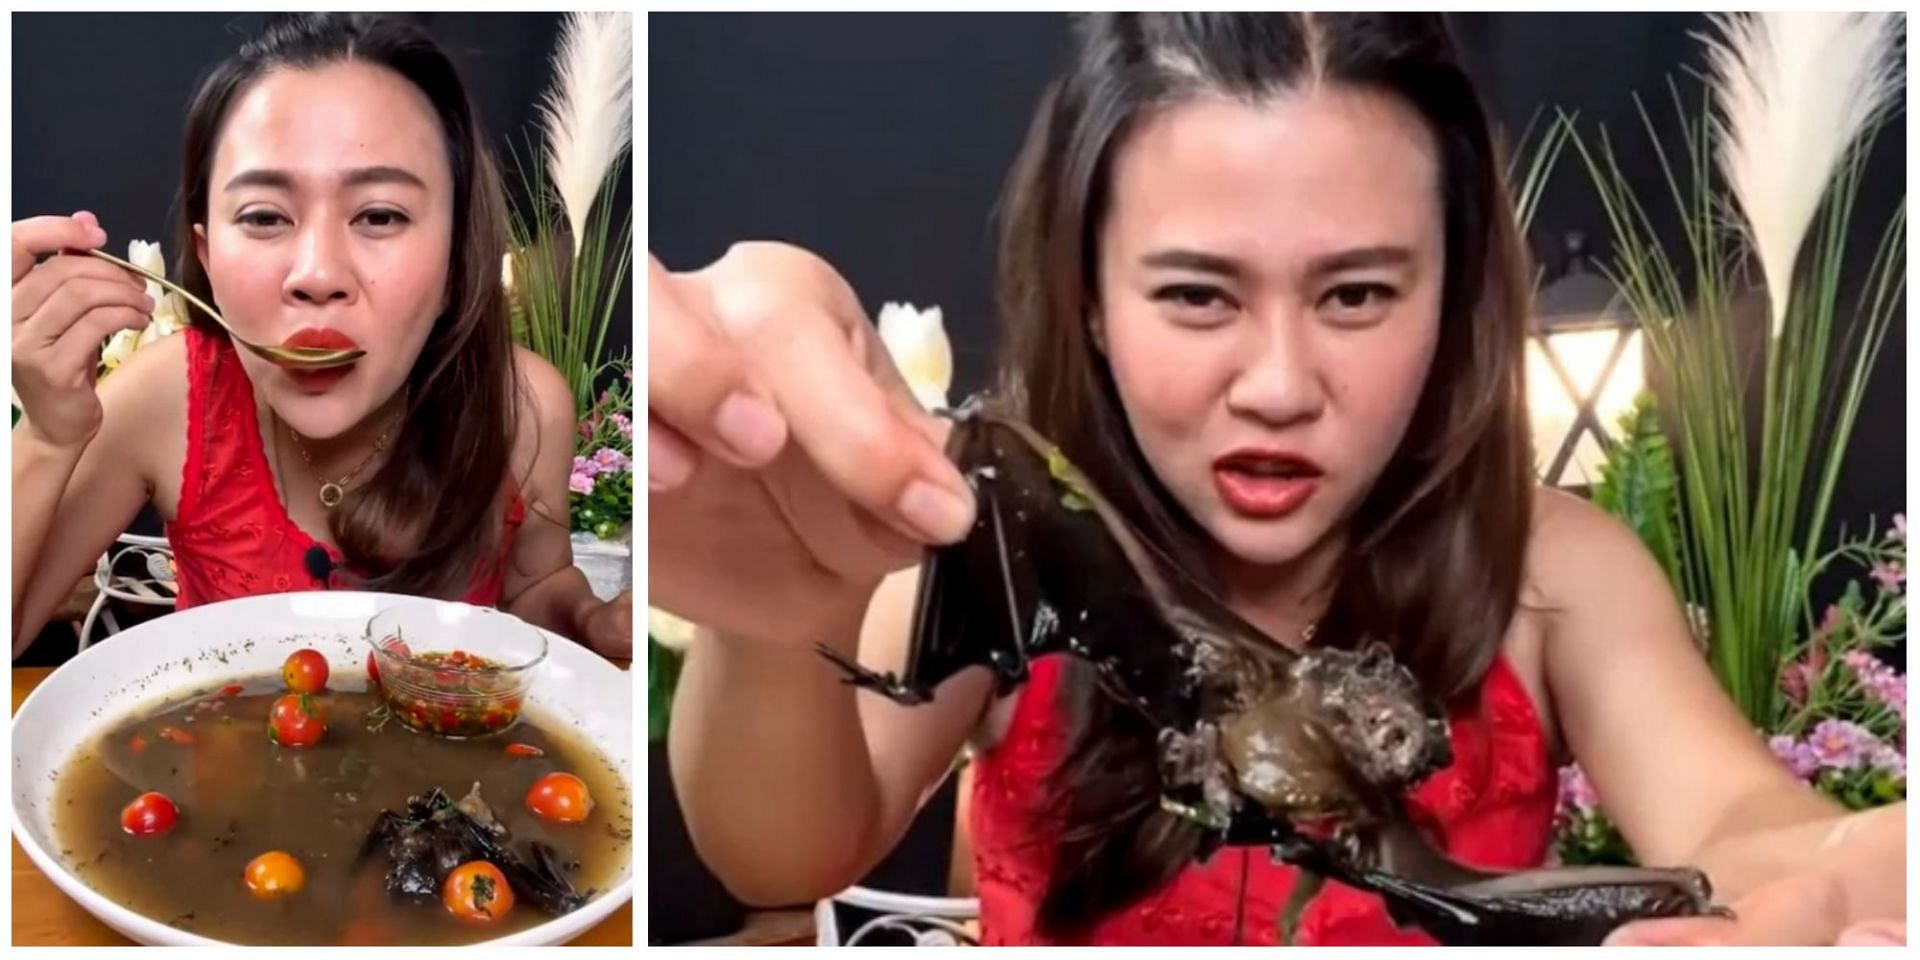 Thai blogger faces 5 years in prison after she uploads a video of herself eating a bat with some soup. (Image via YouTube)